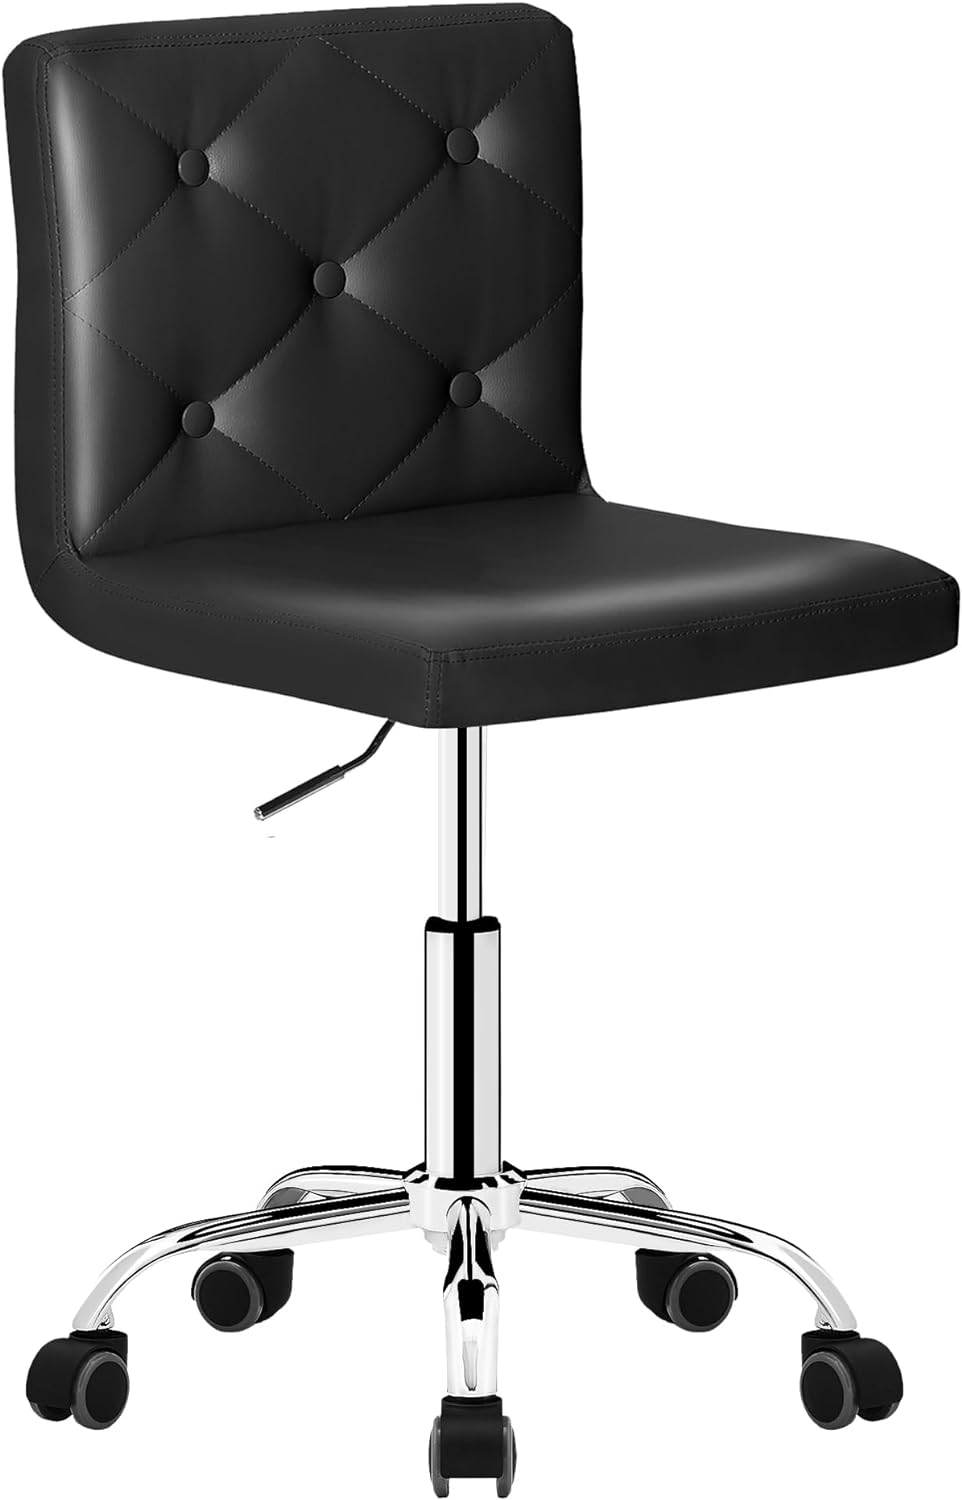 VECELO PU Leather Mid-Back Armless Desk Chair Adjustable Height 360° Rolling Swivel